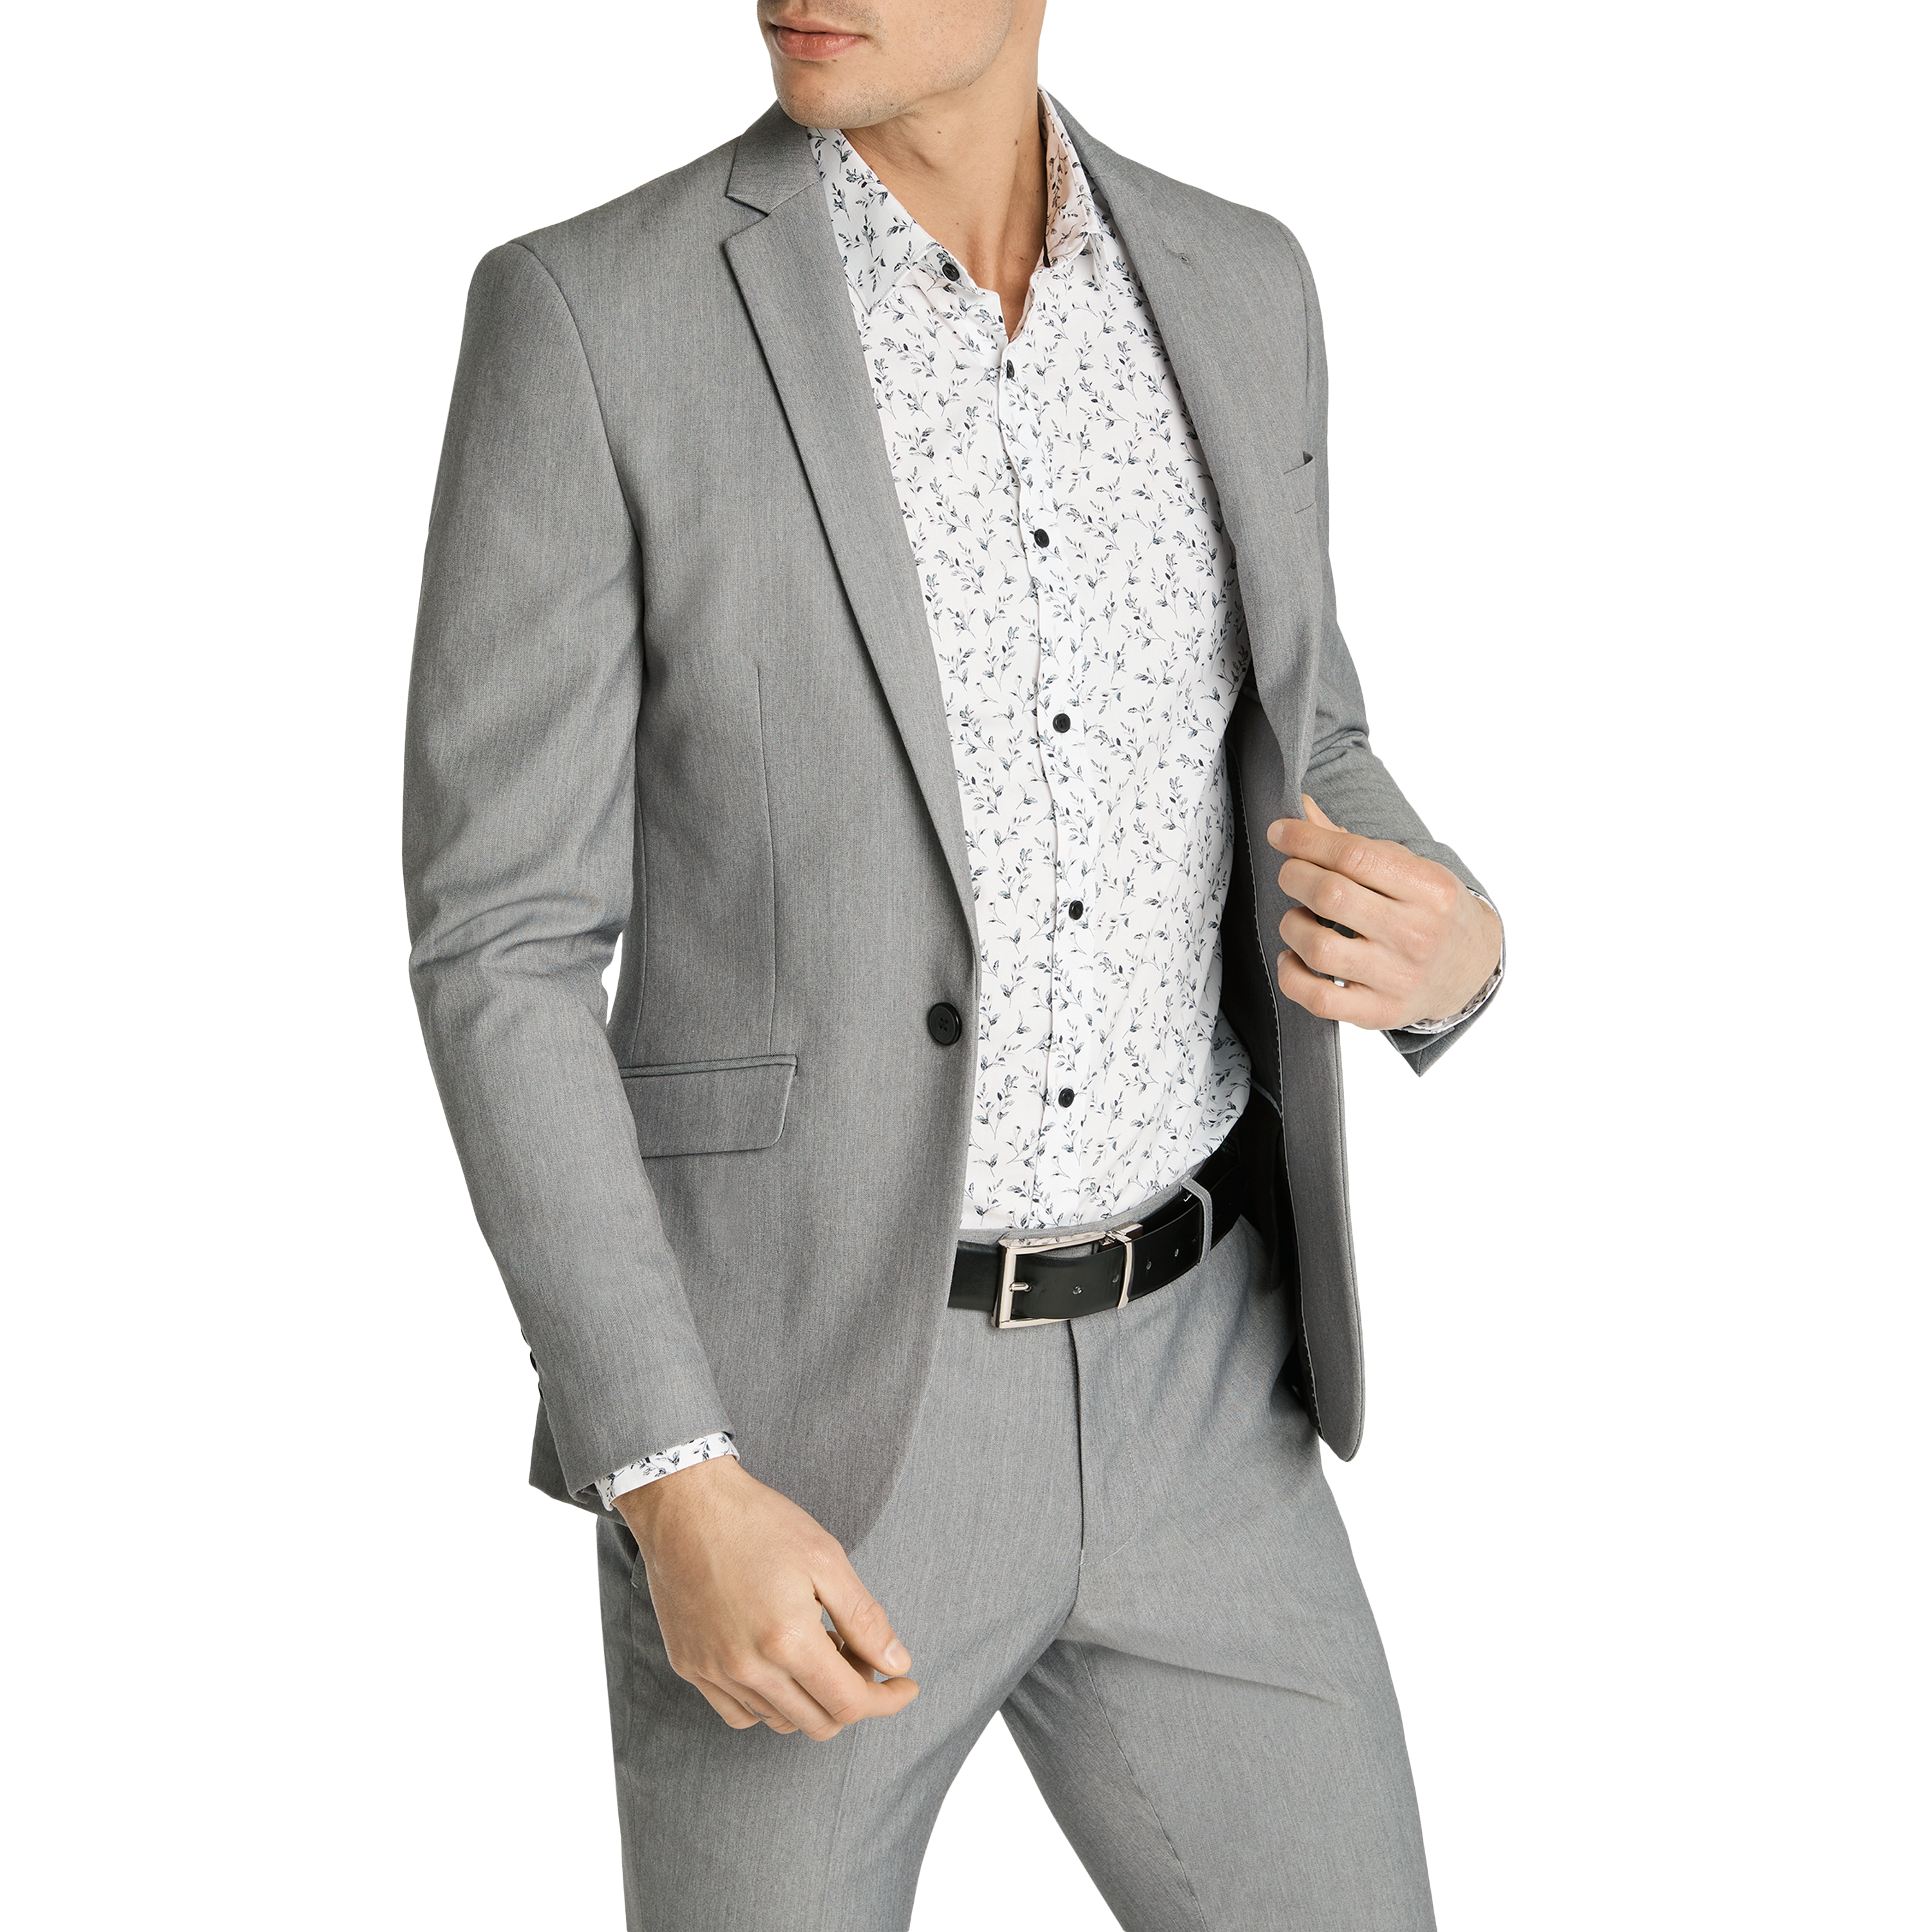 Cocktail Attire For Men  Dress Code Guide For Weddings  Events